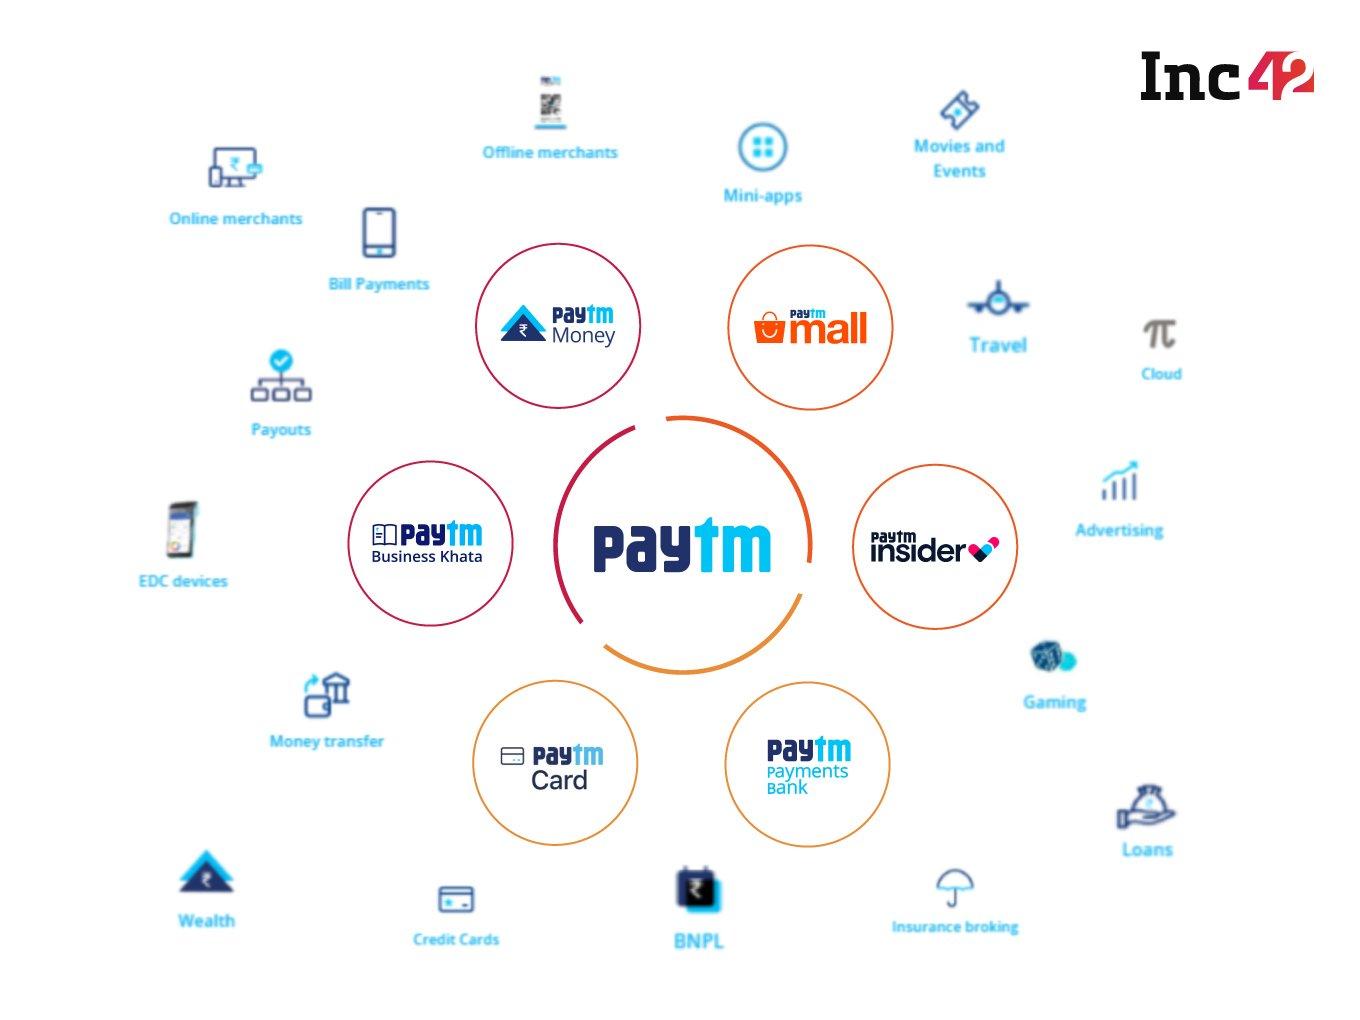 Will Paytm's Transition Beyond Payments To Broader Fintech Play Lead To IPO Success?